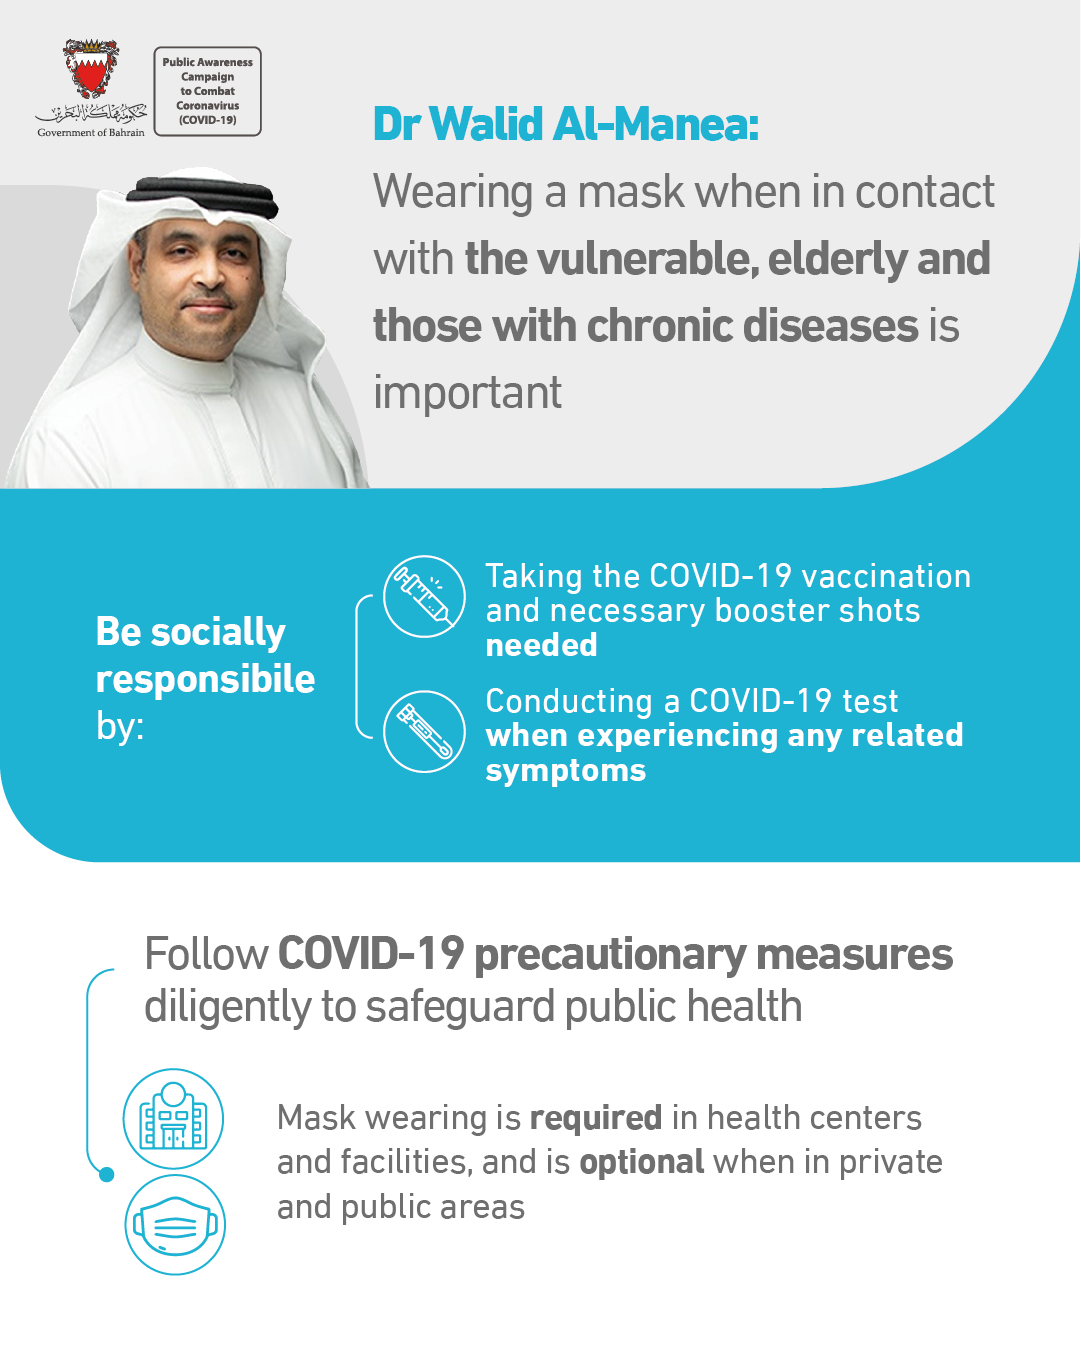 Dr Al Manea highlights the importance of following COVID-19 precautionary measures